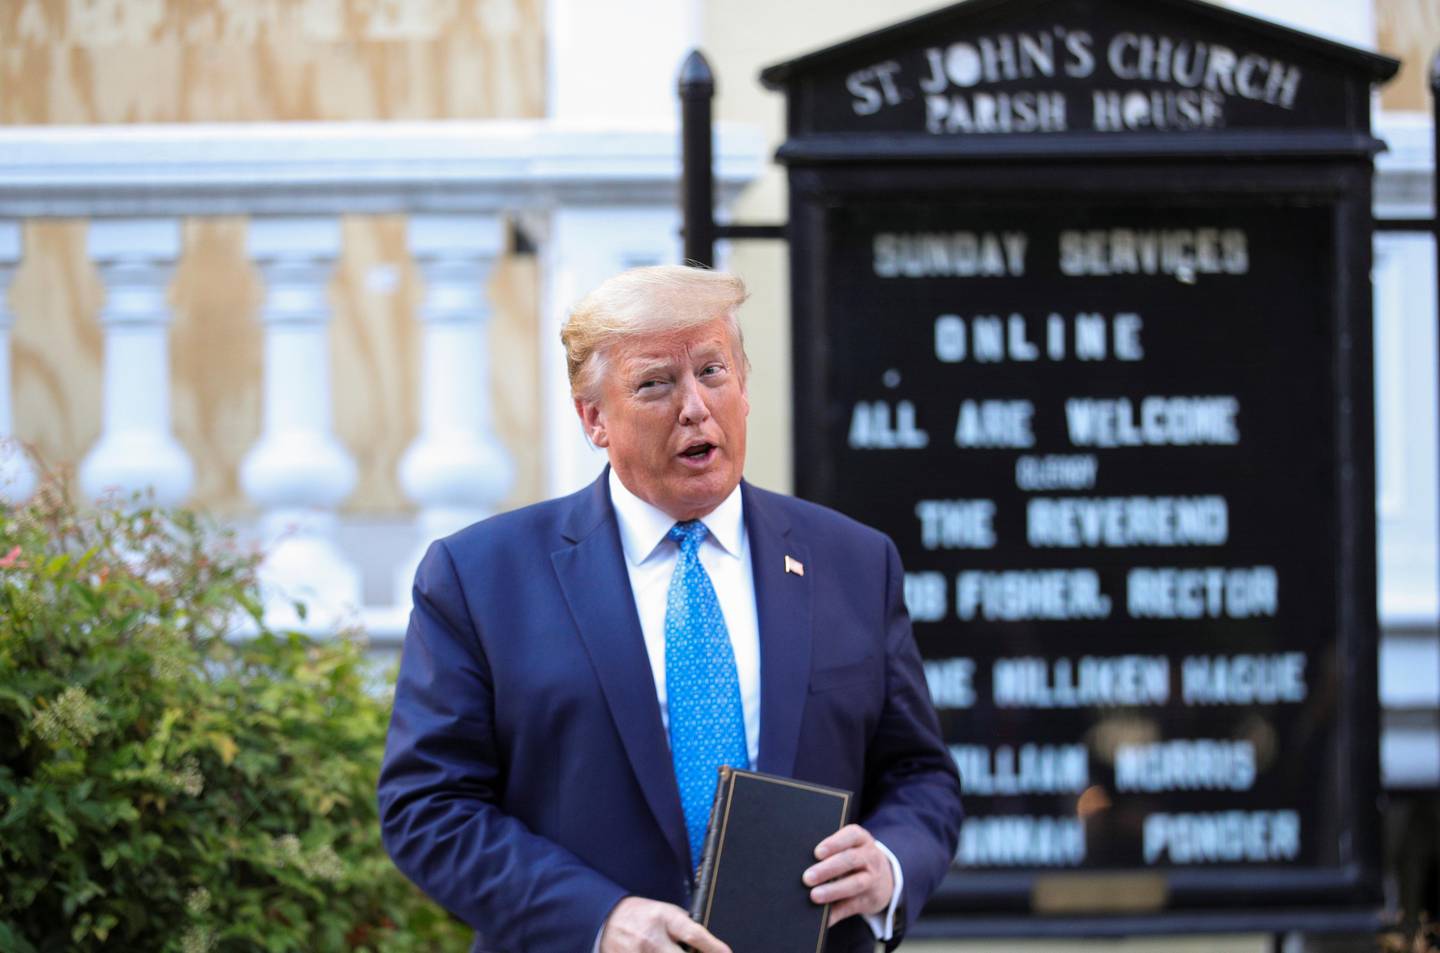 U.S. President Donald Trump talks to reporters as he holds a Bible during a photo opportunity in front of St. John's Episcopal Church in the midst of ongoing protests over racial inequality in the wake of the death of George Floyd while in Minneapolis police custody, outside the White House in Washington, U.S., June 1, 2020. REUTERS/Tom Brenner